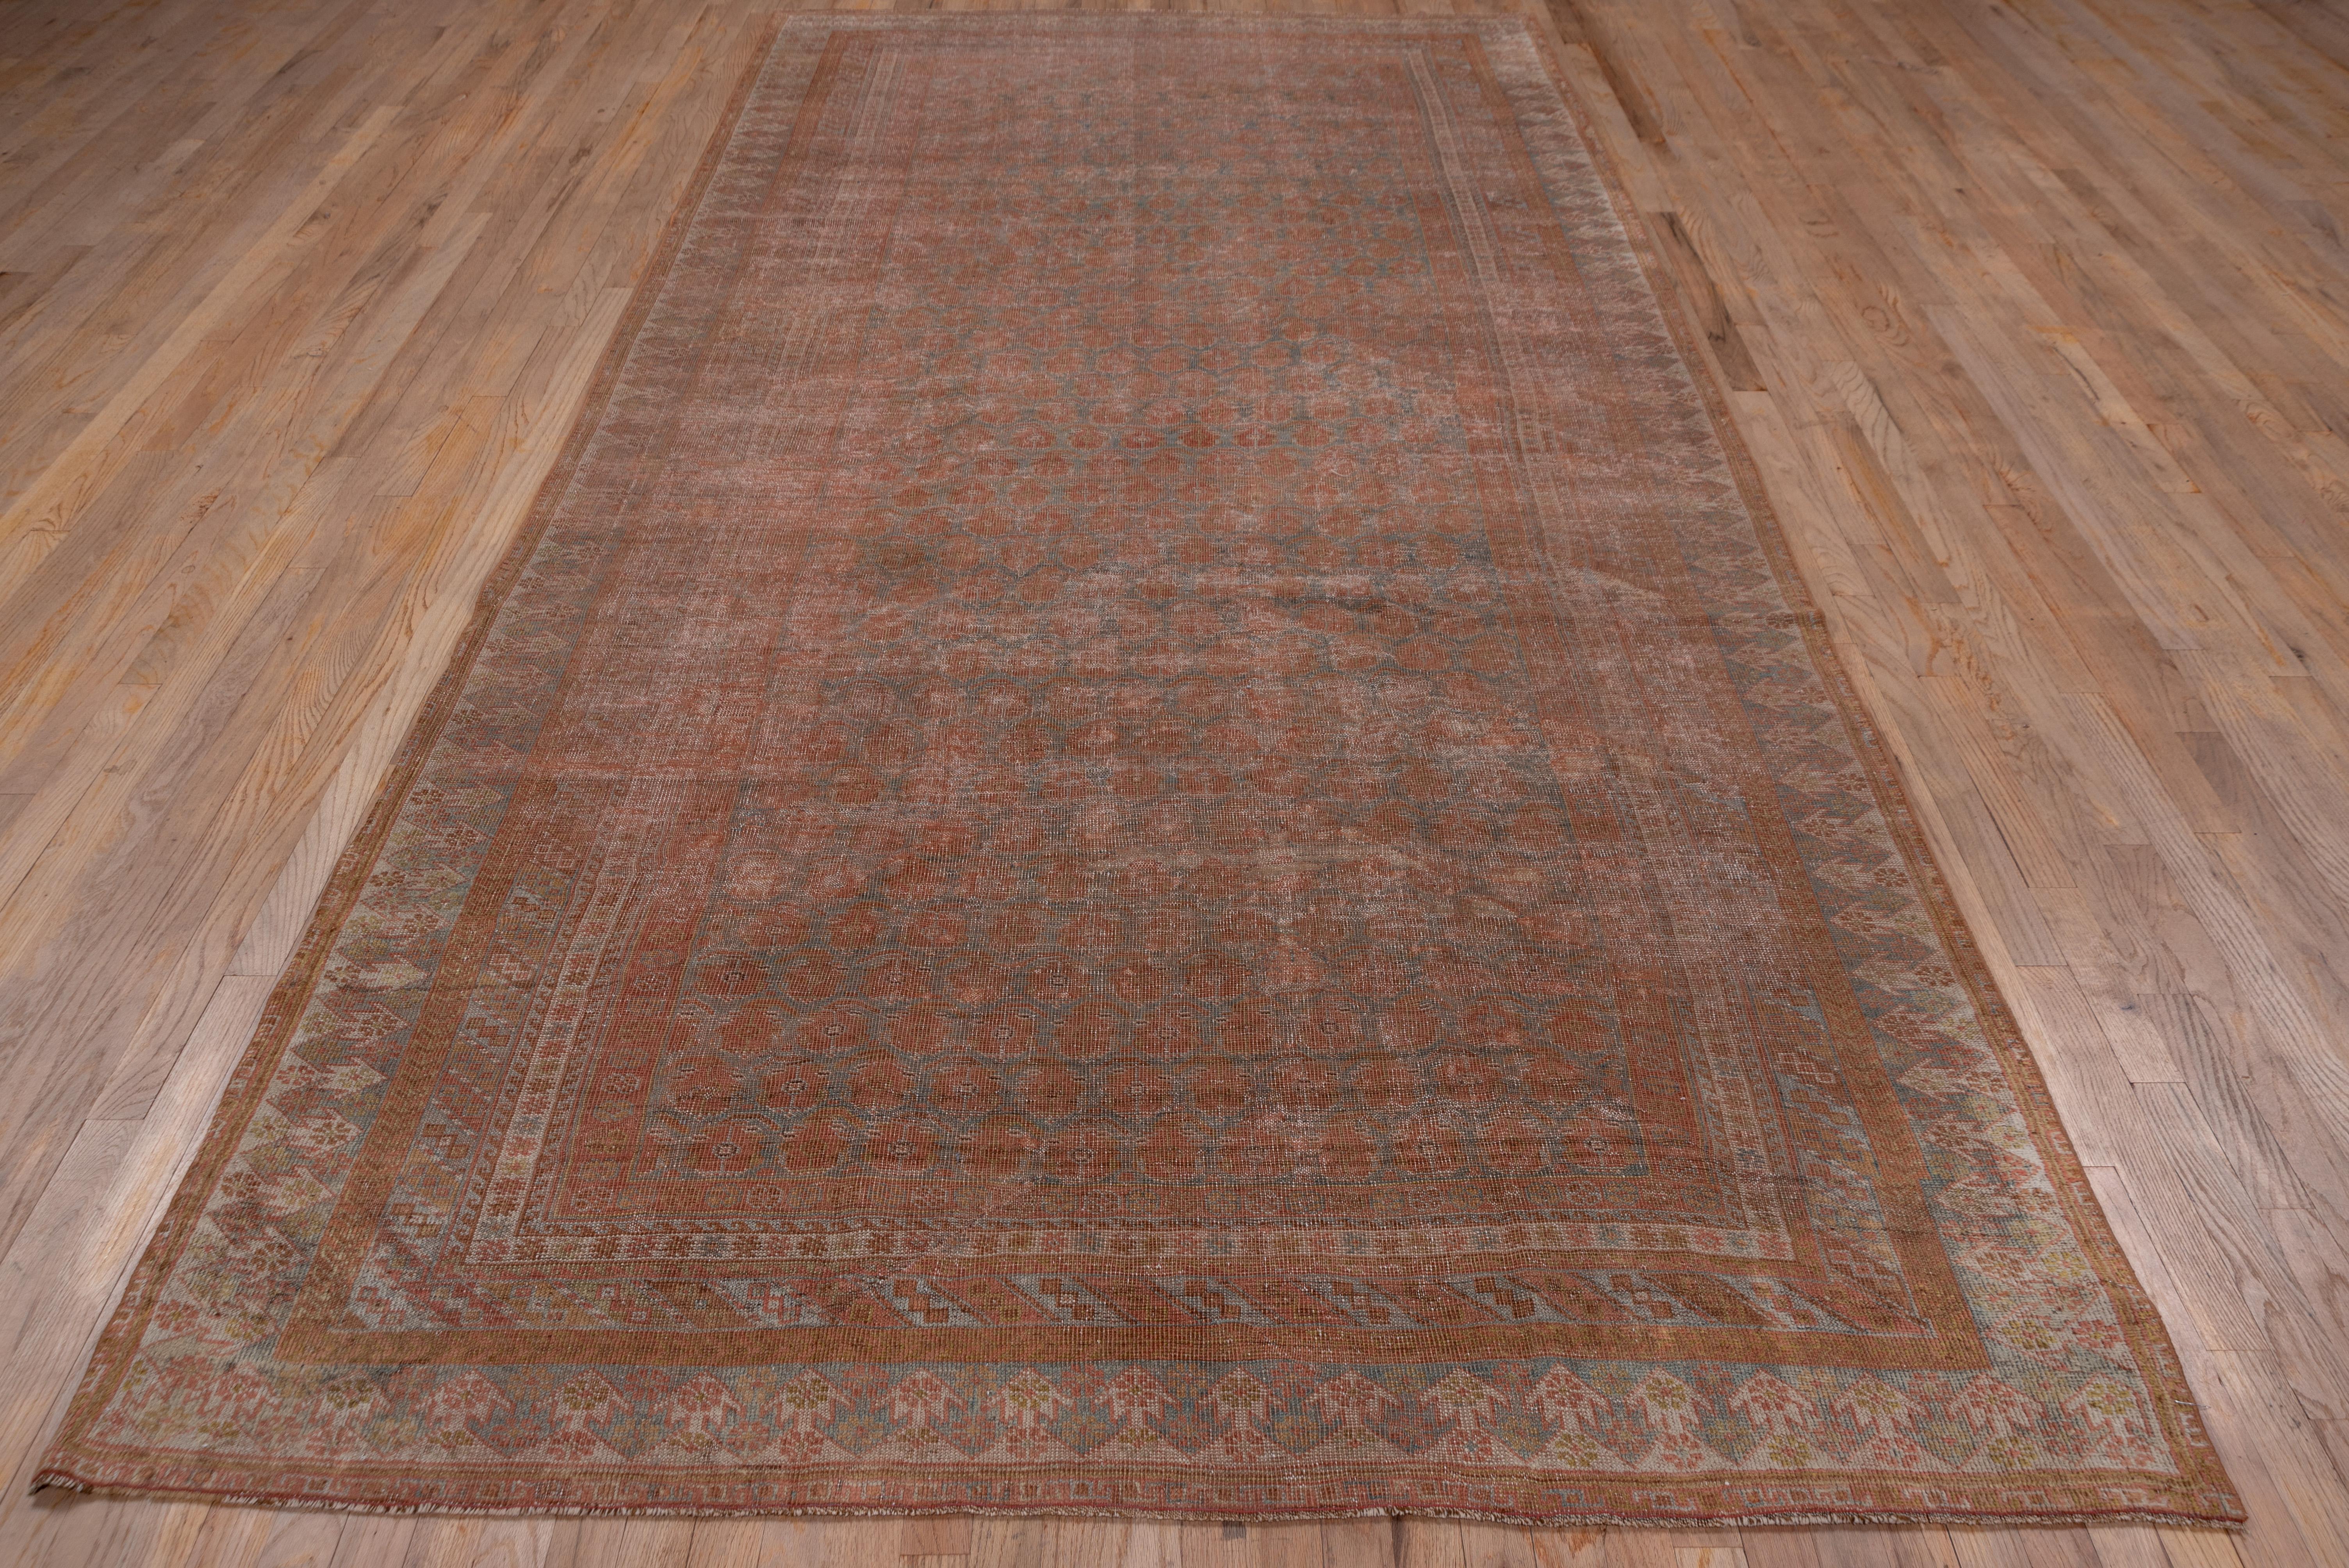 Early 20th Century Unique Persian Afshar Gallery Rug, Allover Field, Soft Blue & Orange Tones For Sale